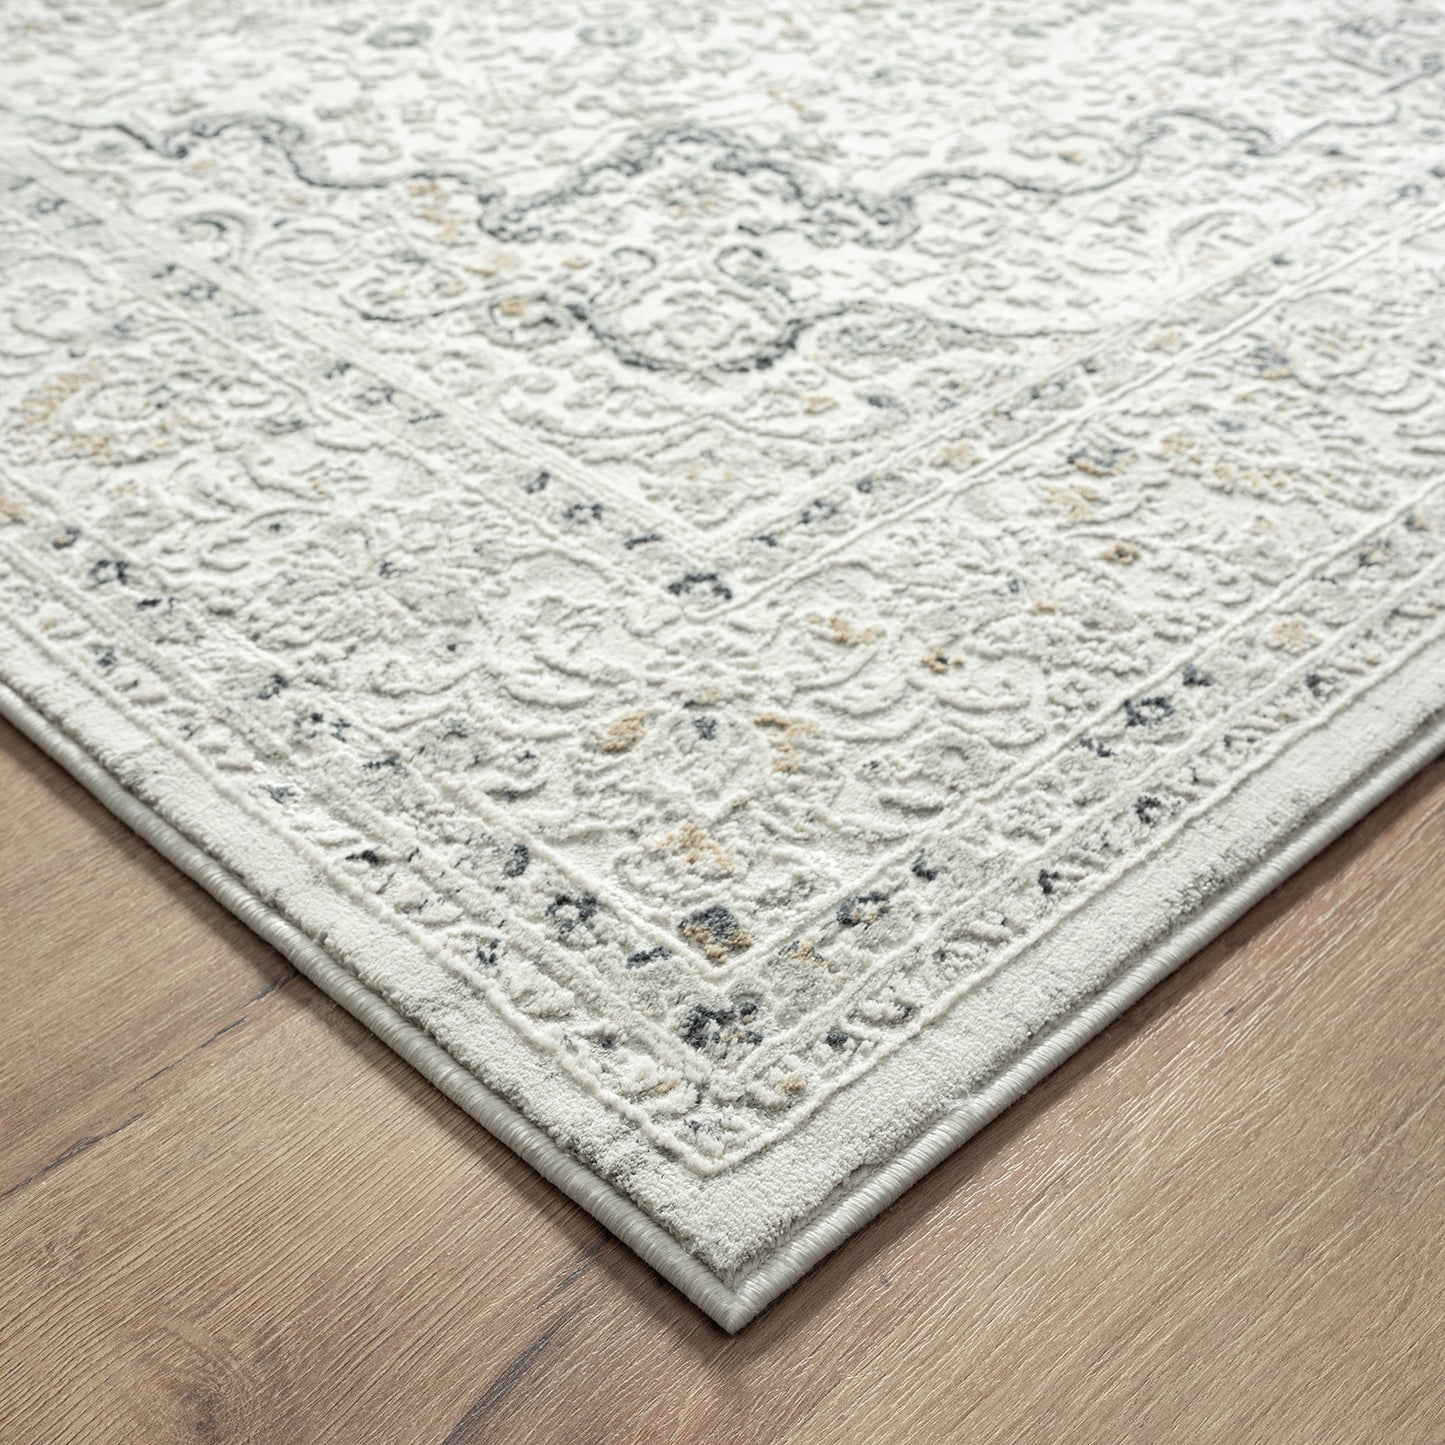 4' X 6' Ivory and Gray Floral Medallion Stain Resistant Area Rug